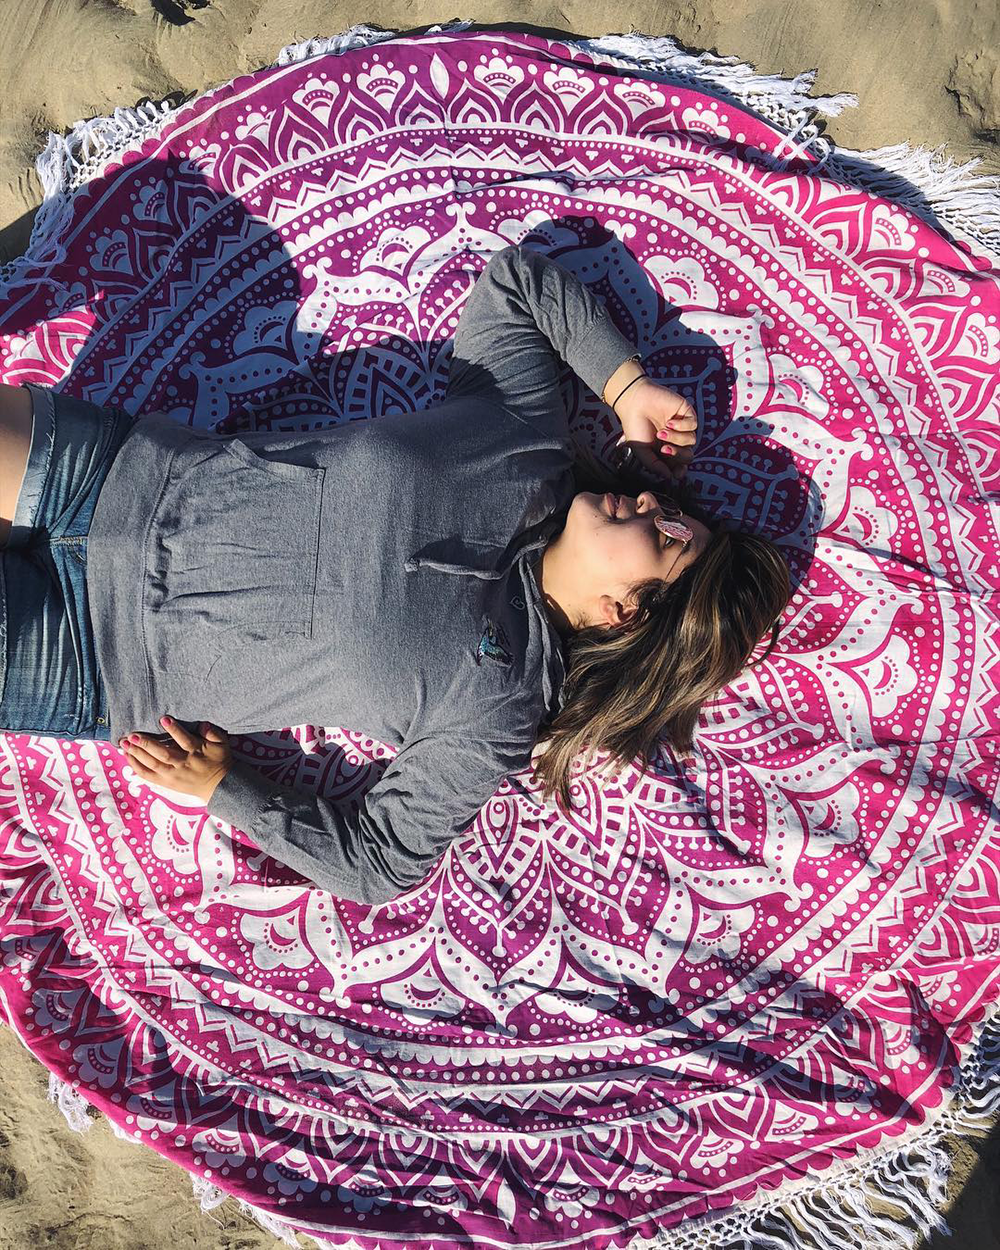 Relaxing on the beach is so much better with the Pretty in Pink Boho Roundie. A colorful round Indian Tapestry perfect for those Instagram worthy shots.